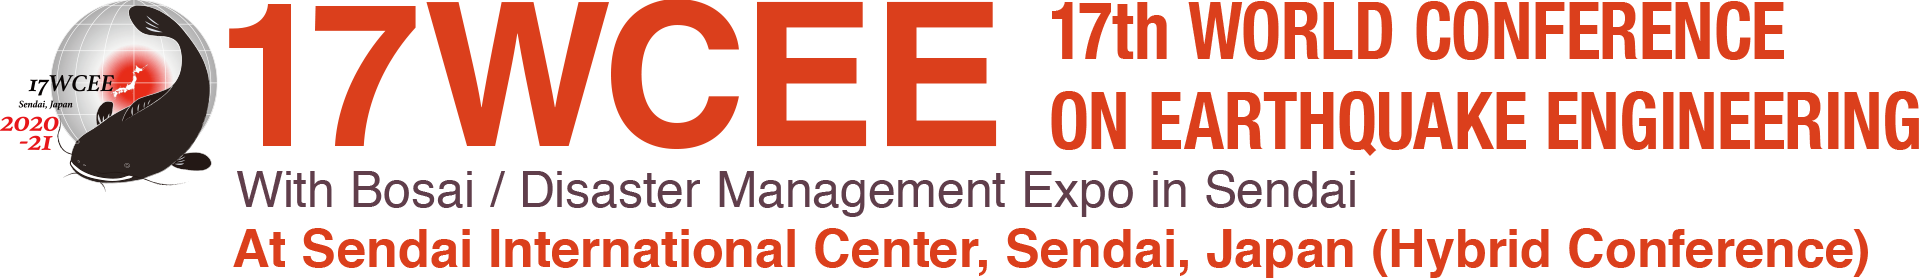 17WCEE -17th World Conference on Earthquake Engineering-